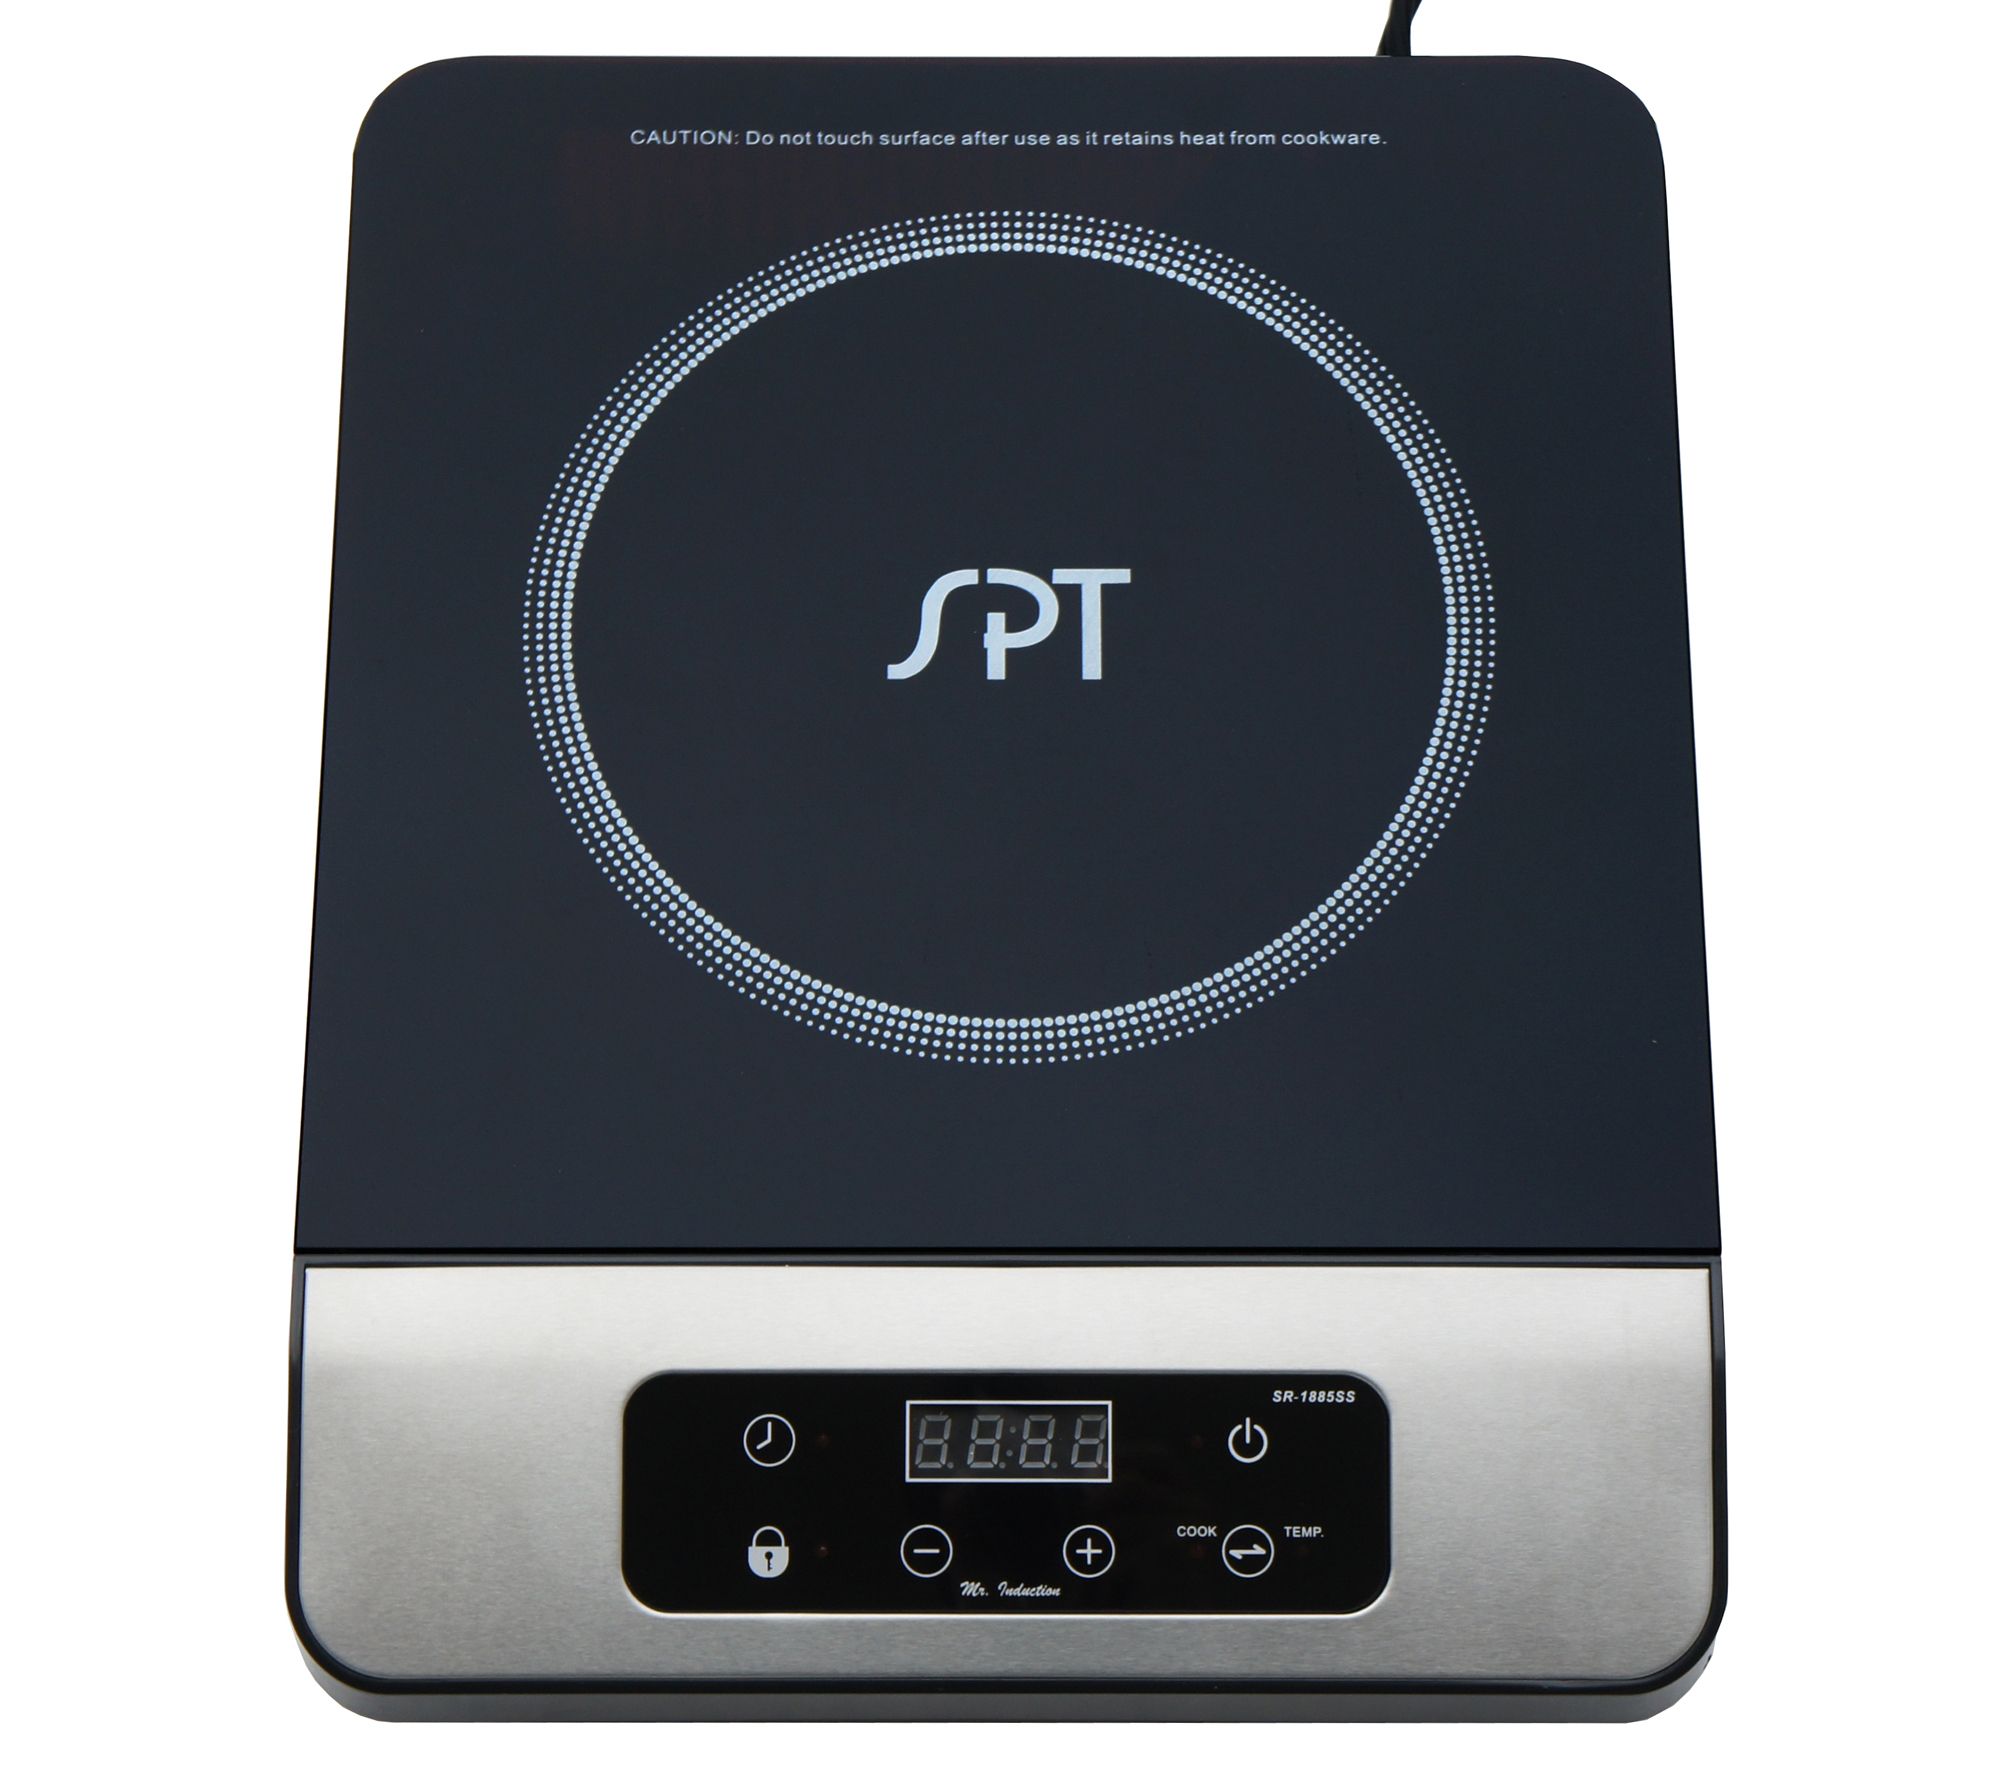 SPT 1300W Induction in Black (Countertop)